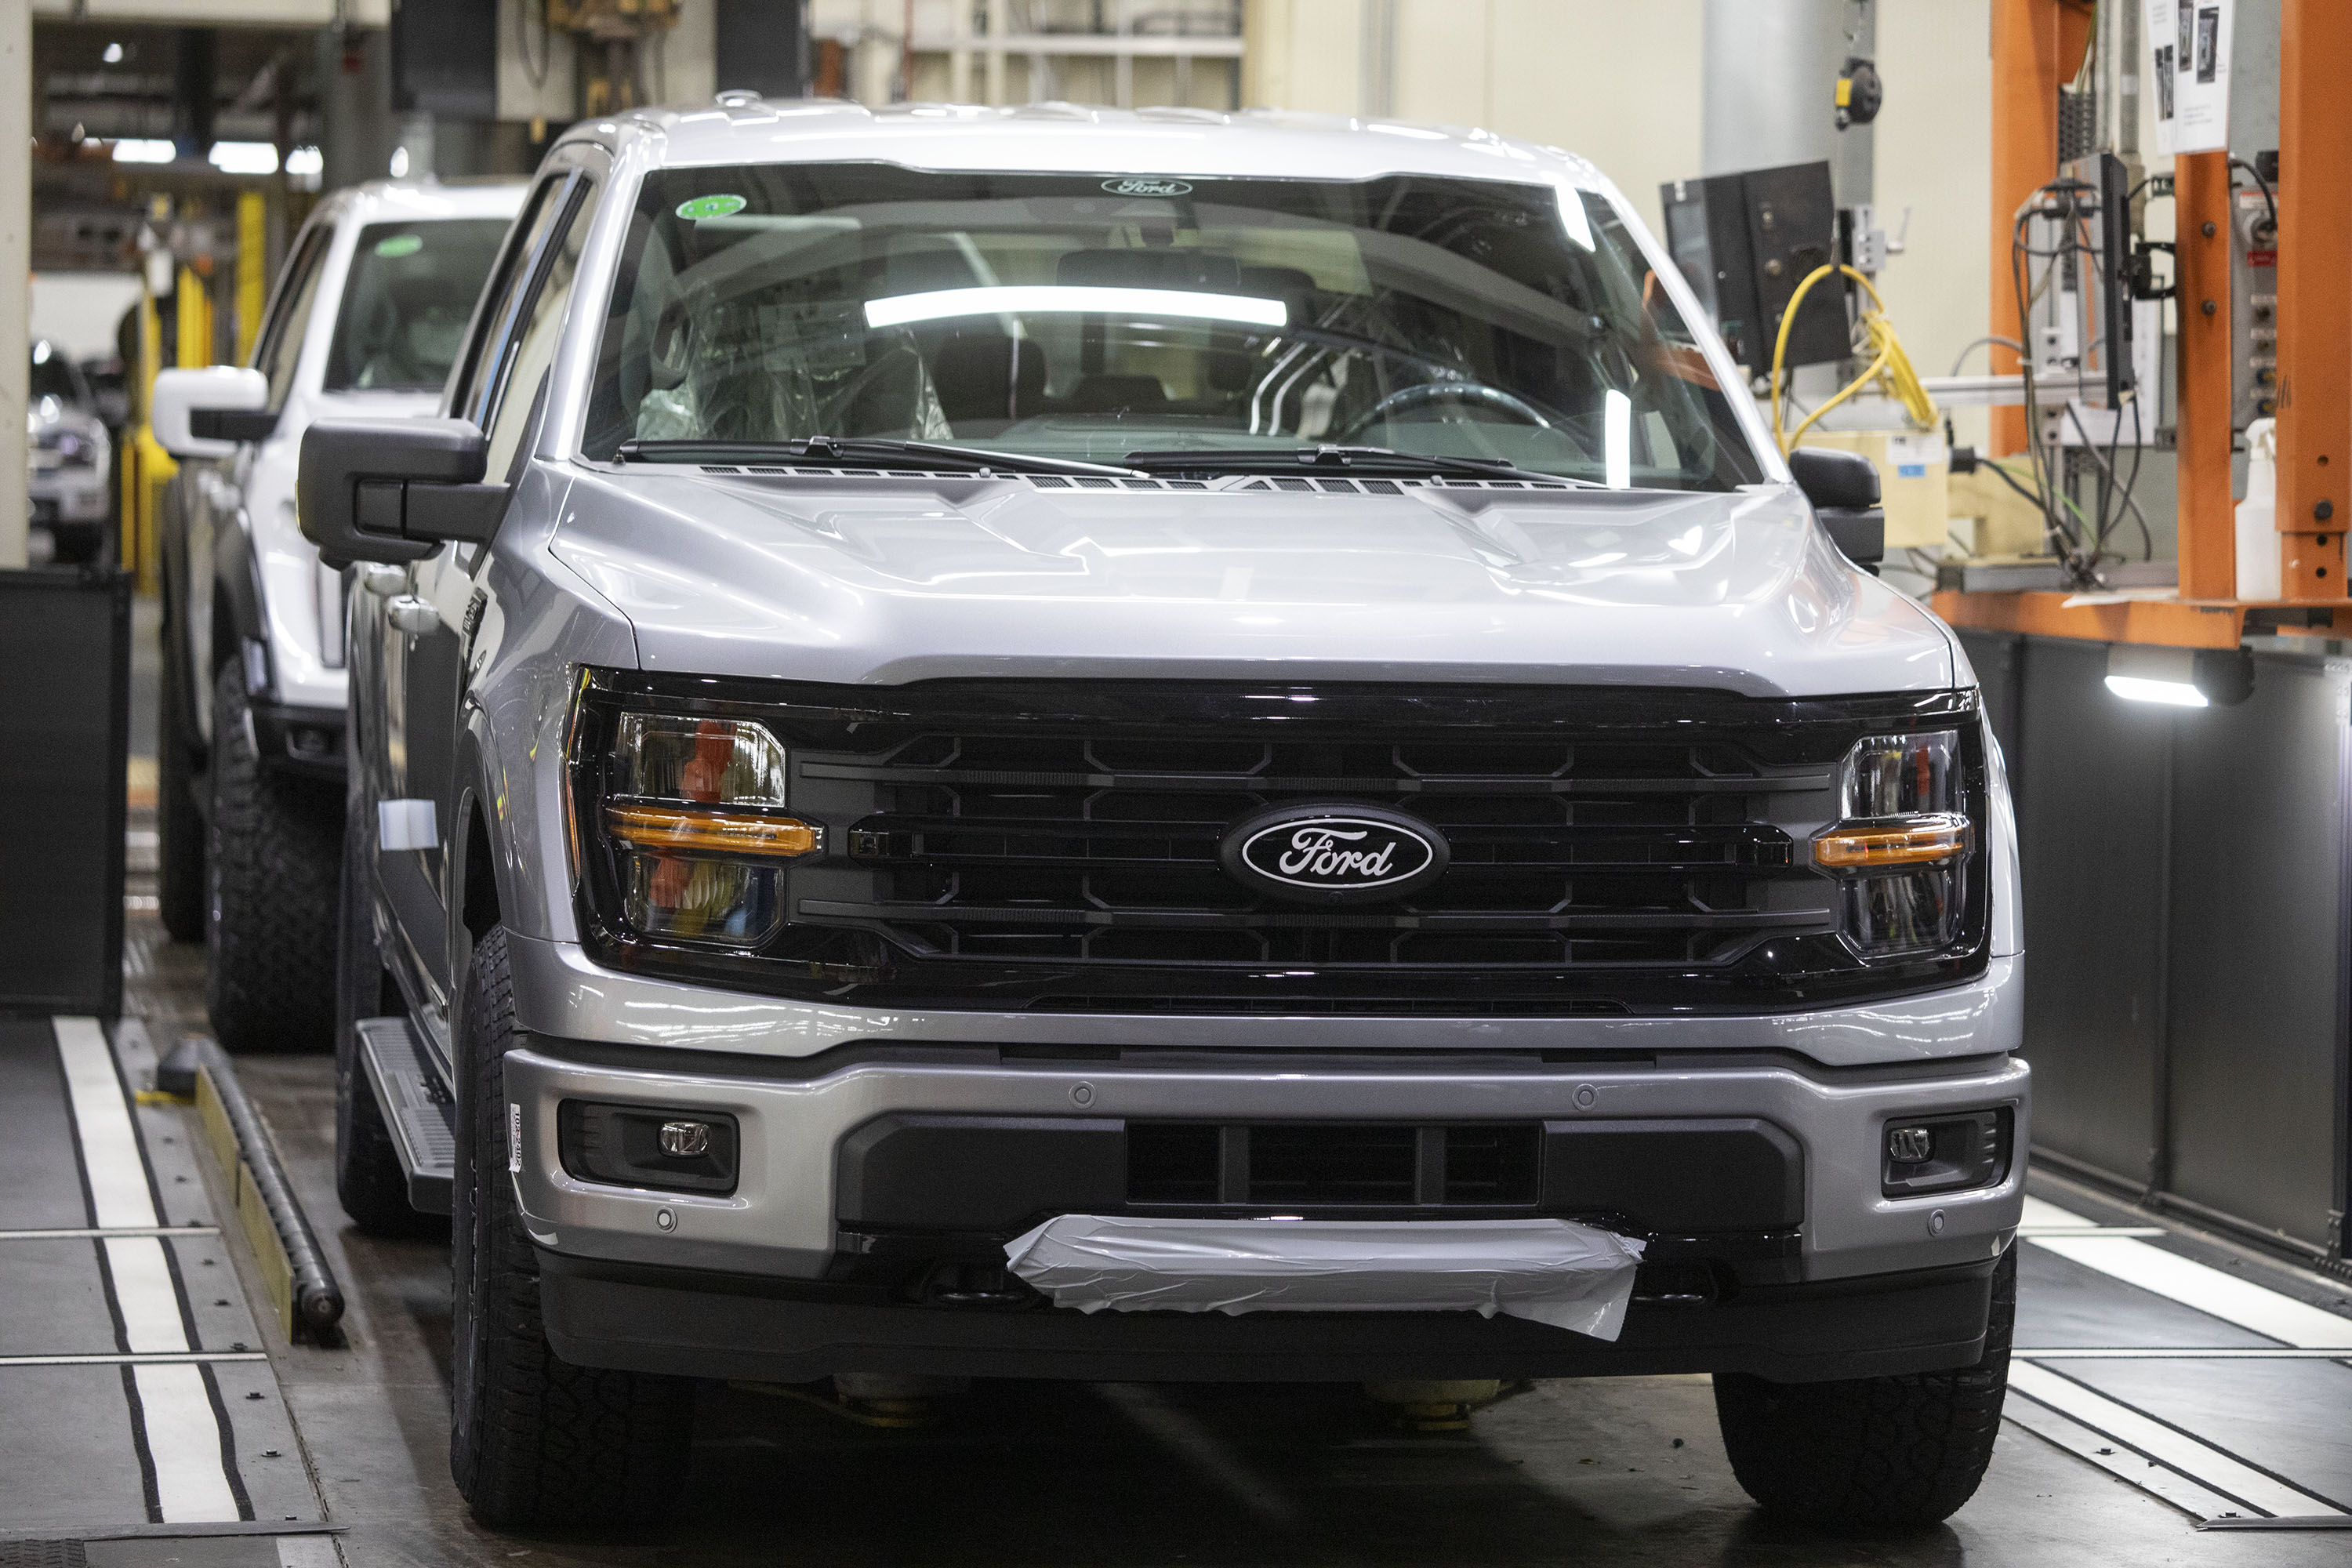 Ford tops Q1 earnings expectations, sees full-year profit ‘tracking to high-end’ of guidance